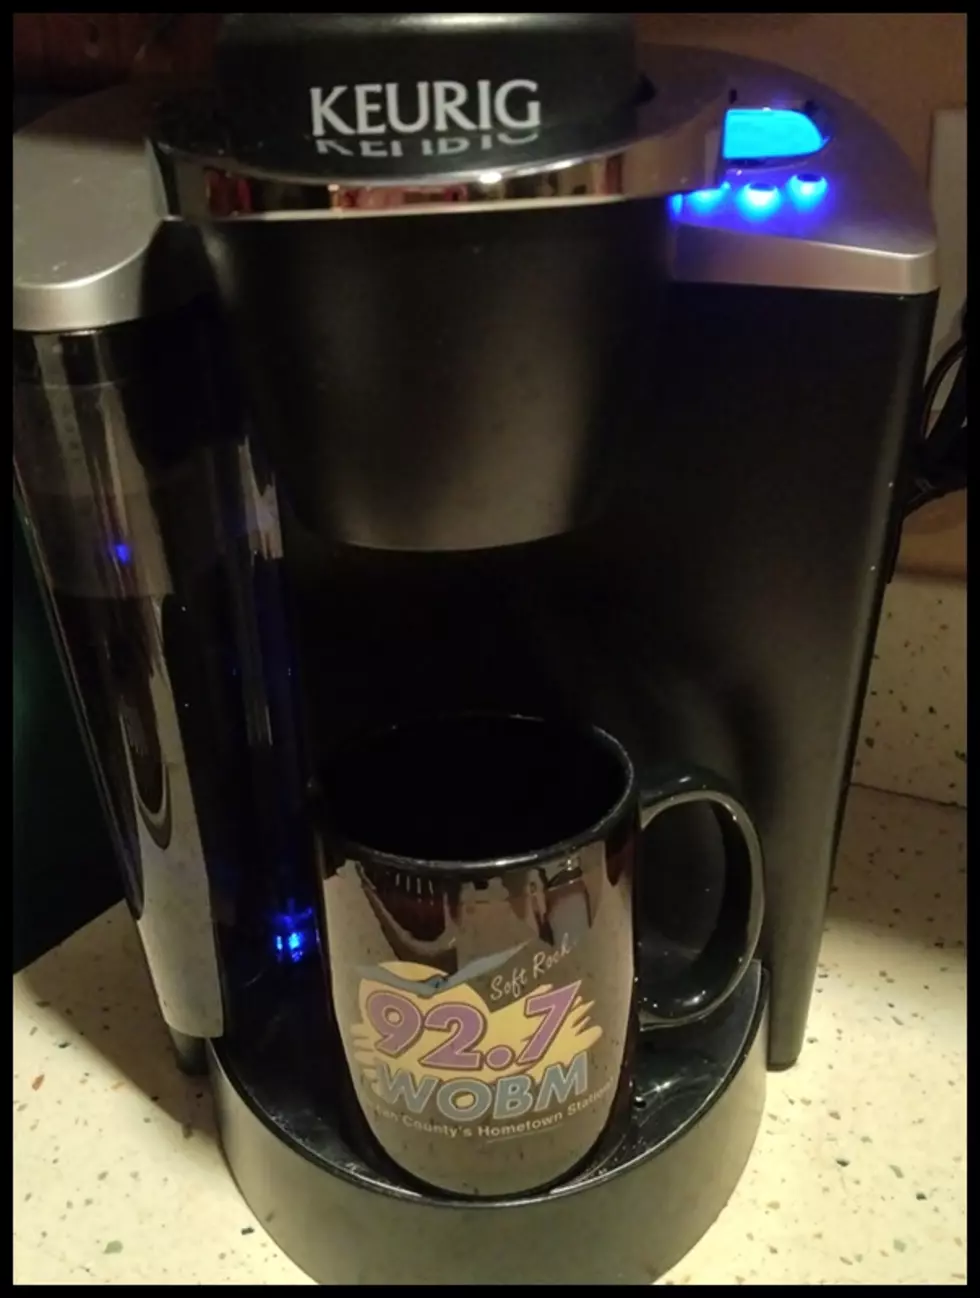 Weekend Coffee, Is it the best ? ~ “Shawniemikes 24 Hour Tick Tock”